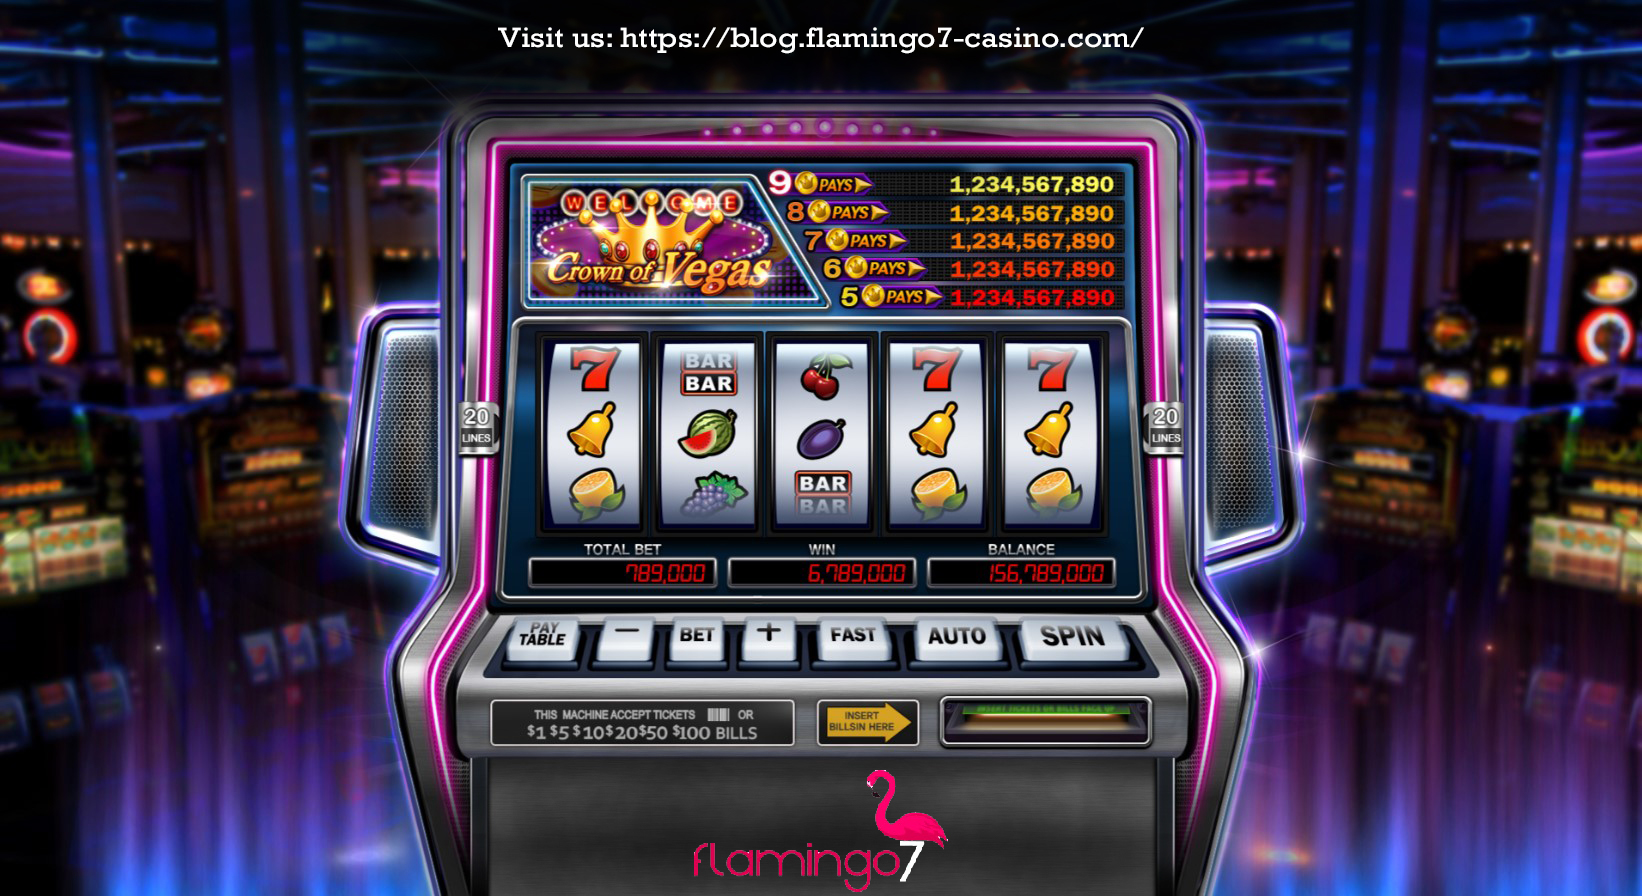 best online slot machines for real money